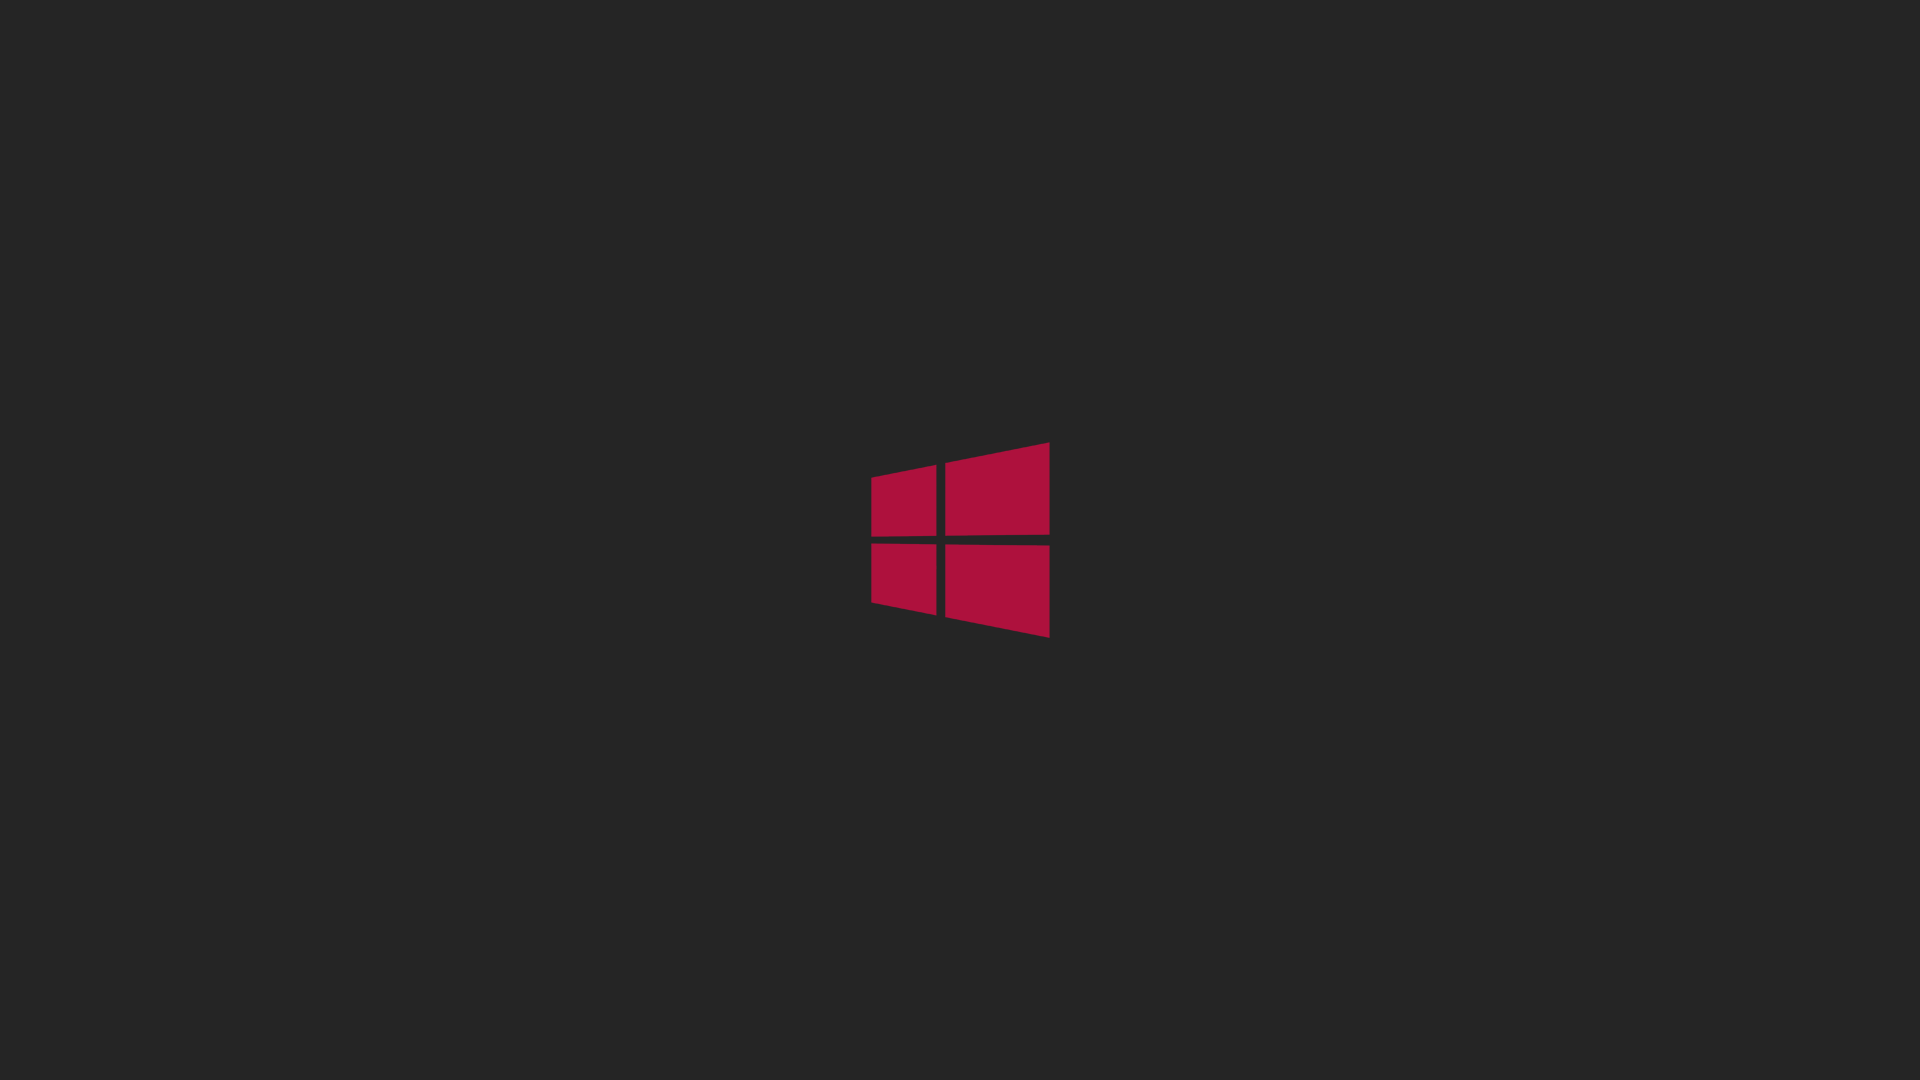 Black Gray and Red Logo - Windows 8 Logo with Red Logo and Black Background | HD Wallpapers